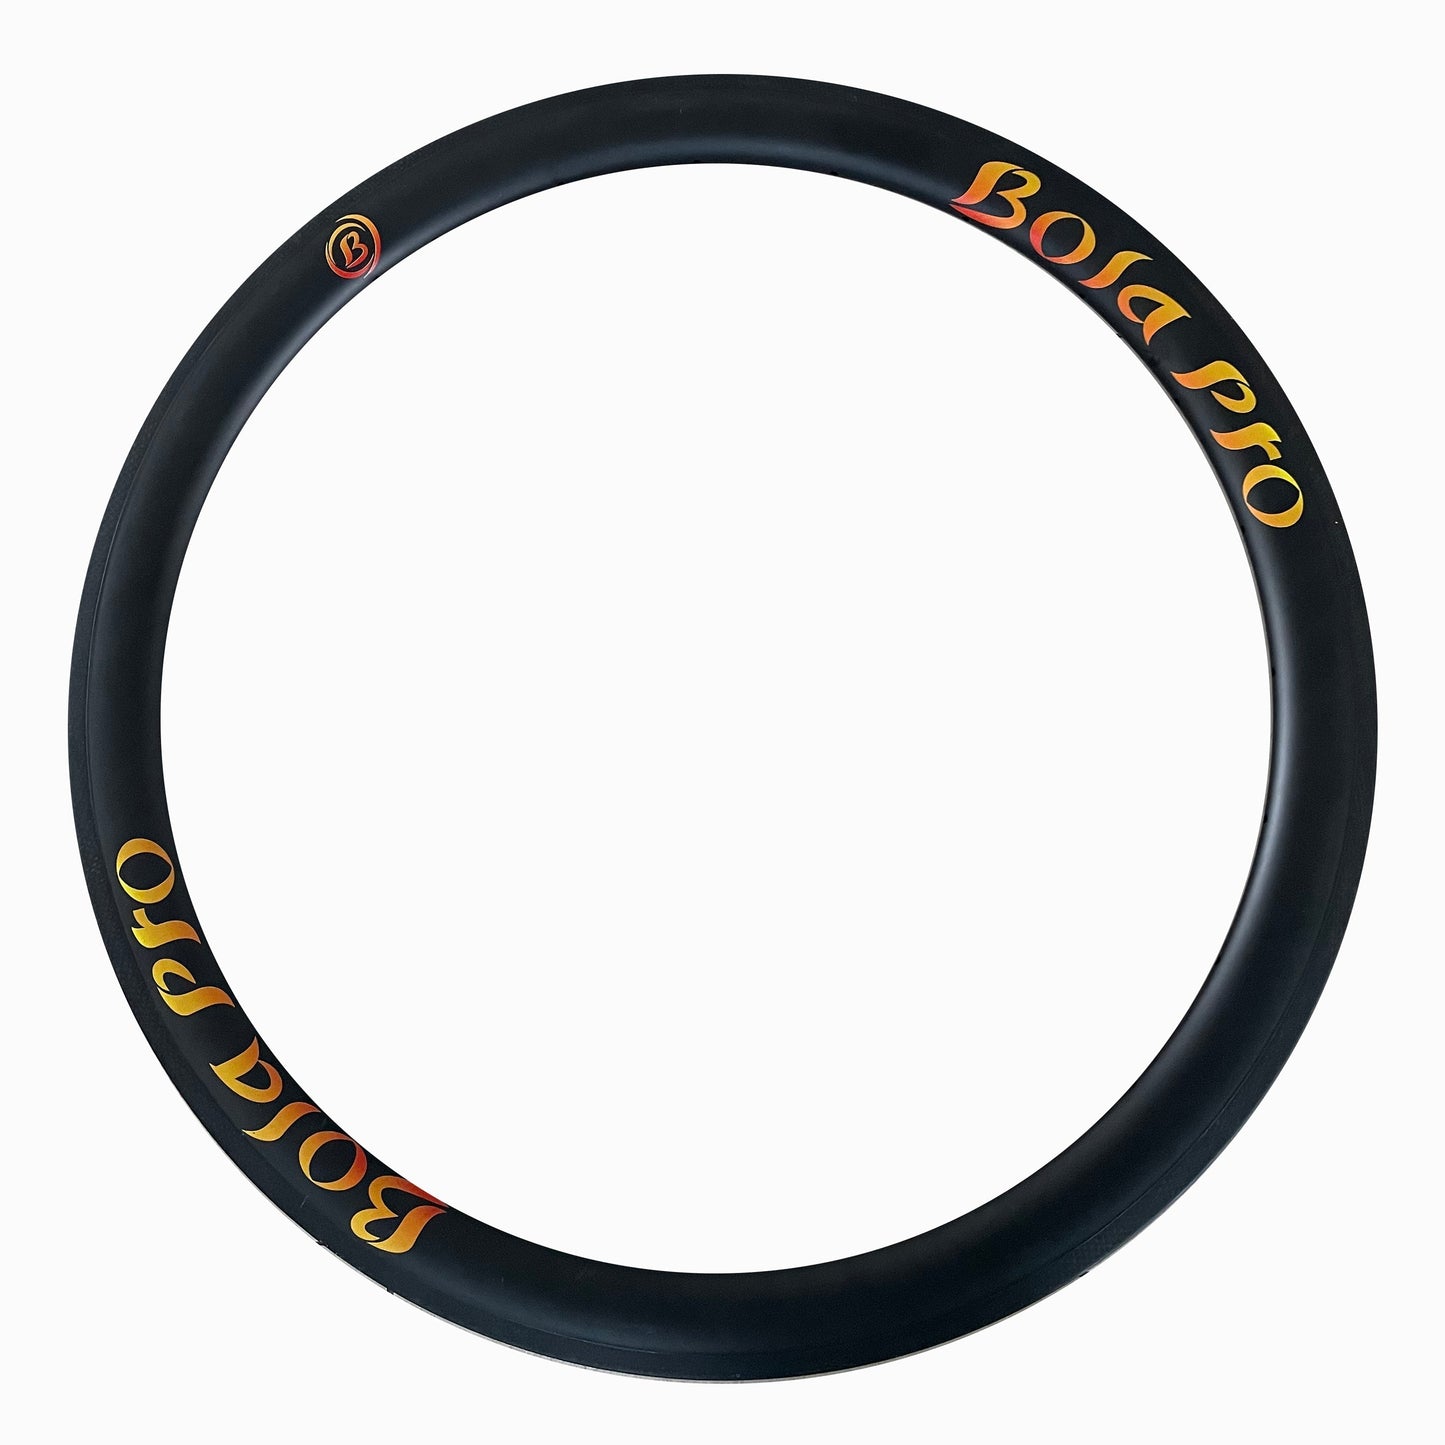 Tubular offset carbon bicycle rims 40mm profile 28mm wide